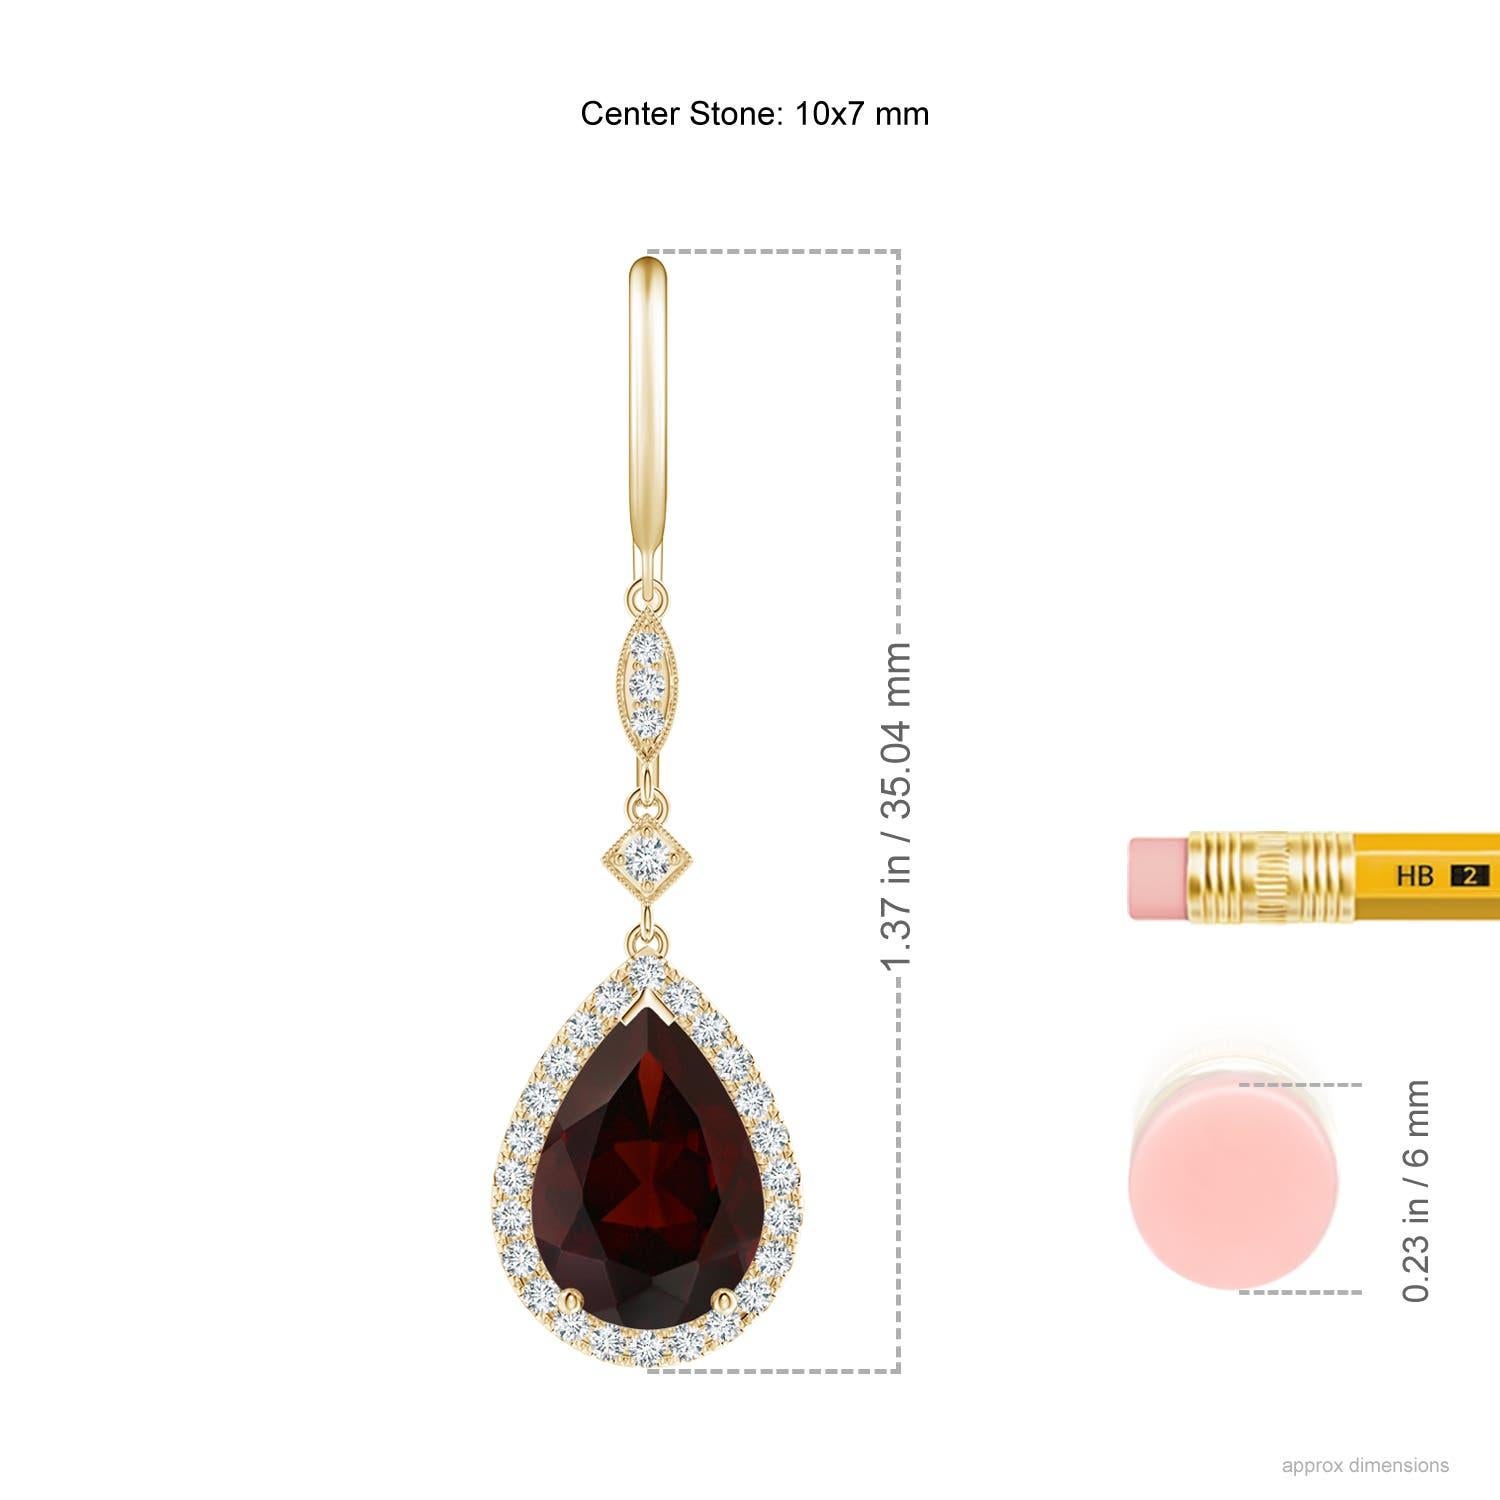 Dangling from shepherd hooks are these beautifully crafted garnet dangle earrings in 14K yellow gold. Pear-shaped garnets are illuminated by a halo of precious white diamonds that create a remarkable contrast. They are connected to station diamonds